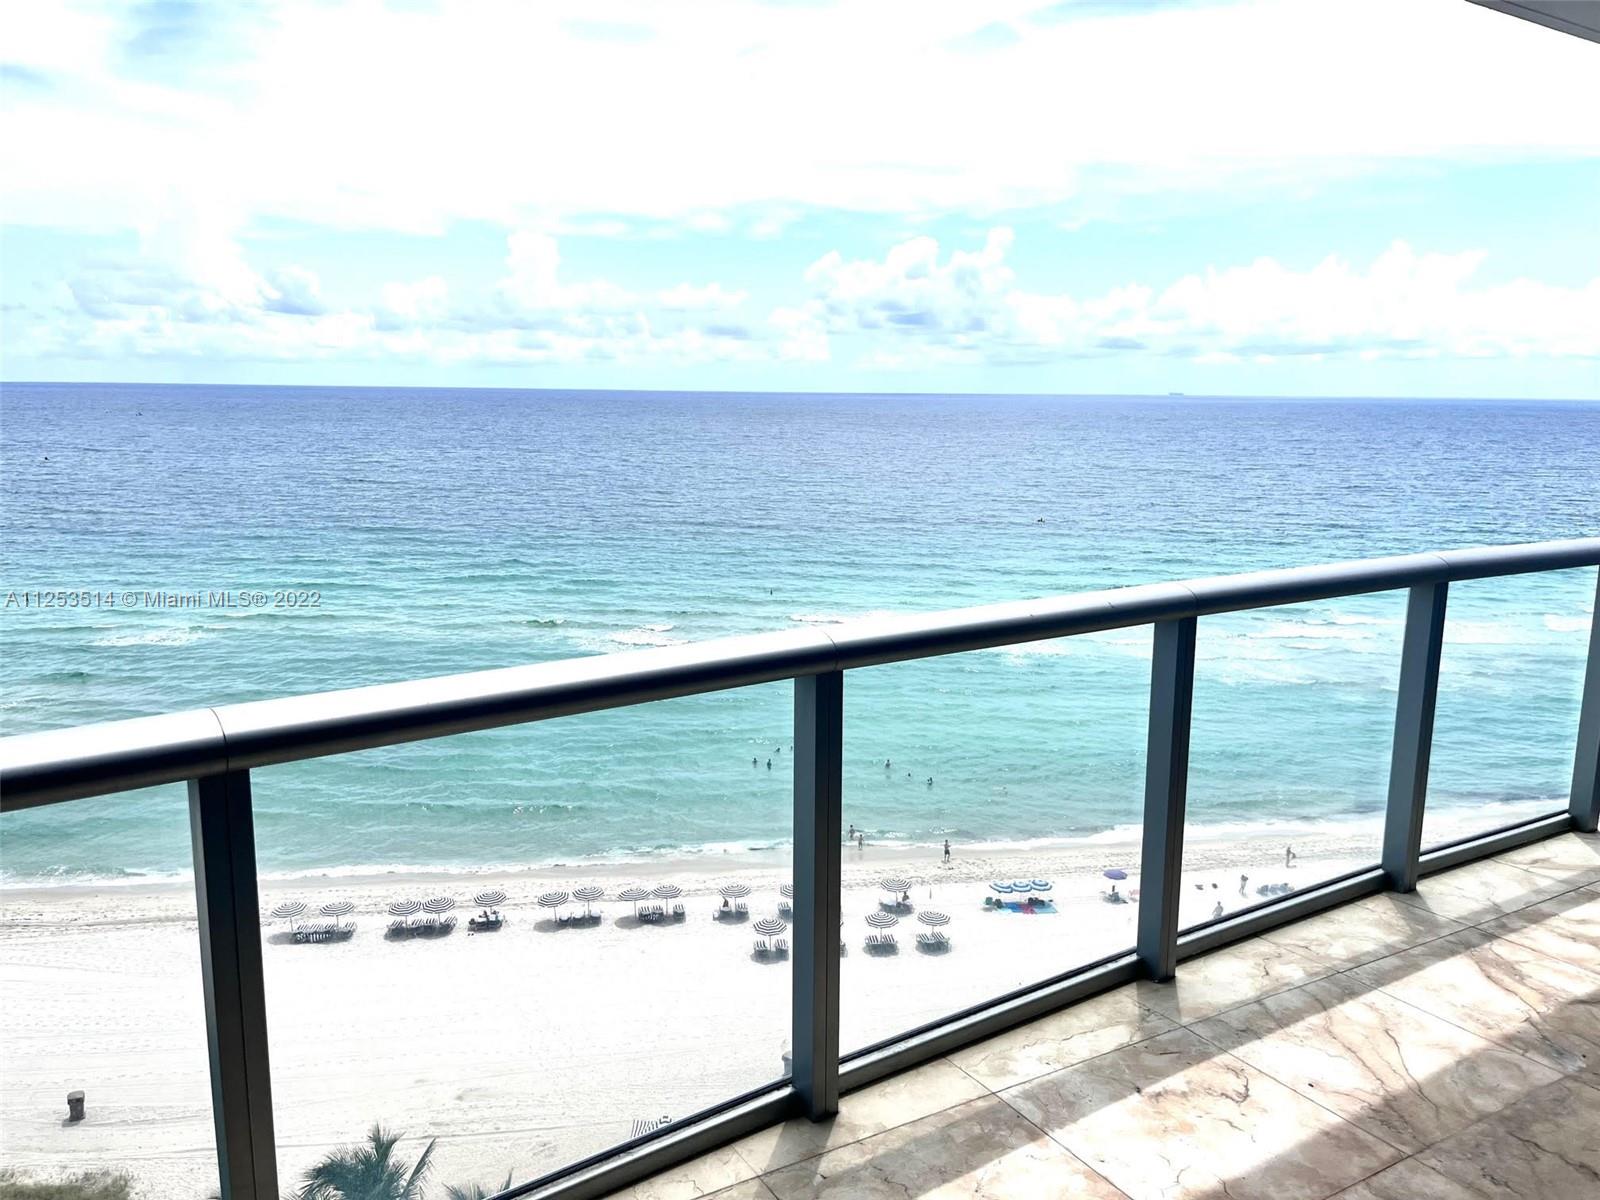 17001  Collins Ave #1204 For Sale A11253514, FL